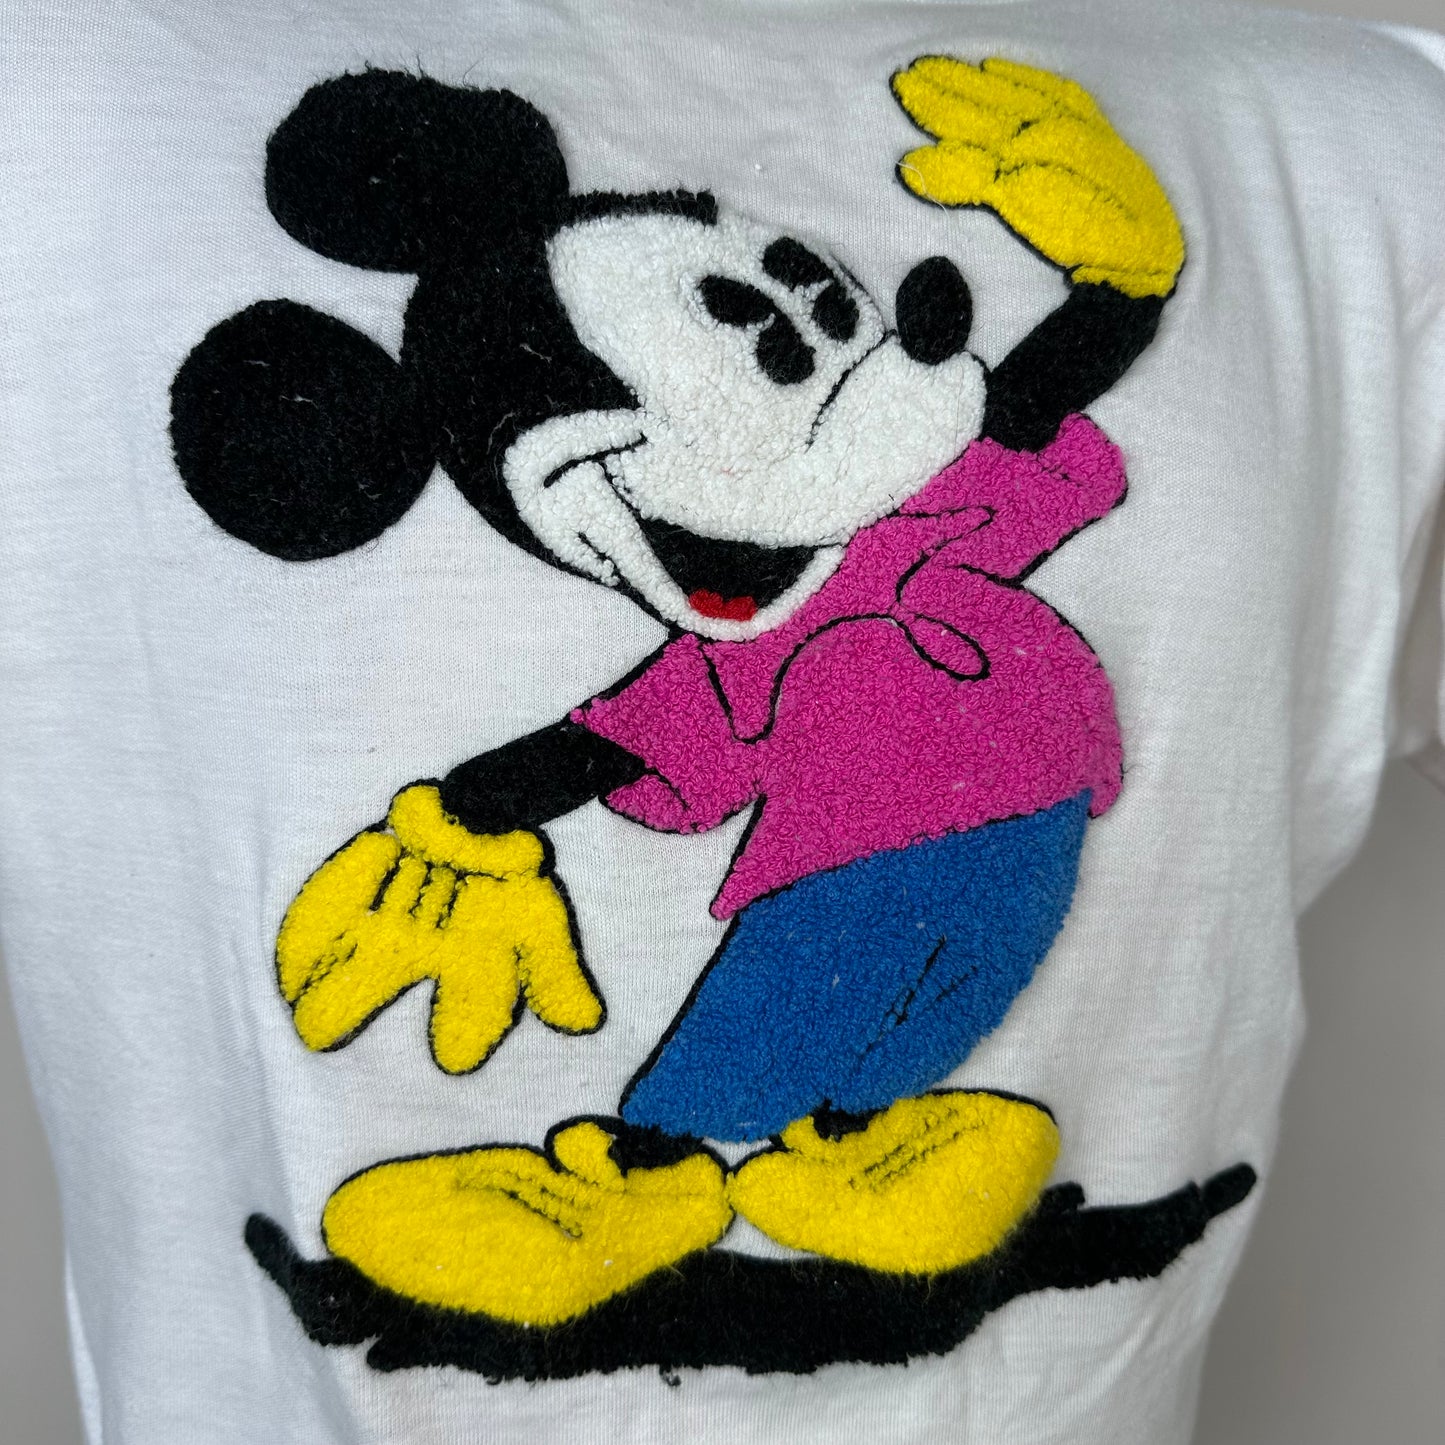 1980s Mickey Mouse T-Shirt, Sunday Comics Size Medium, Chenille Embroidery